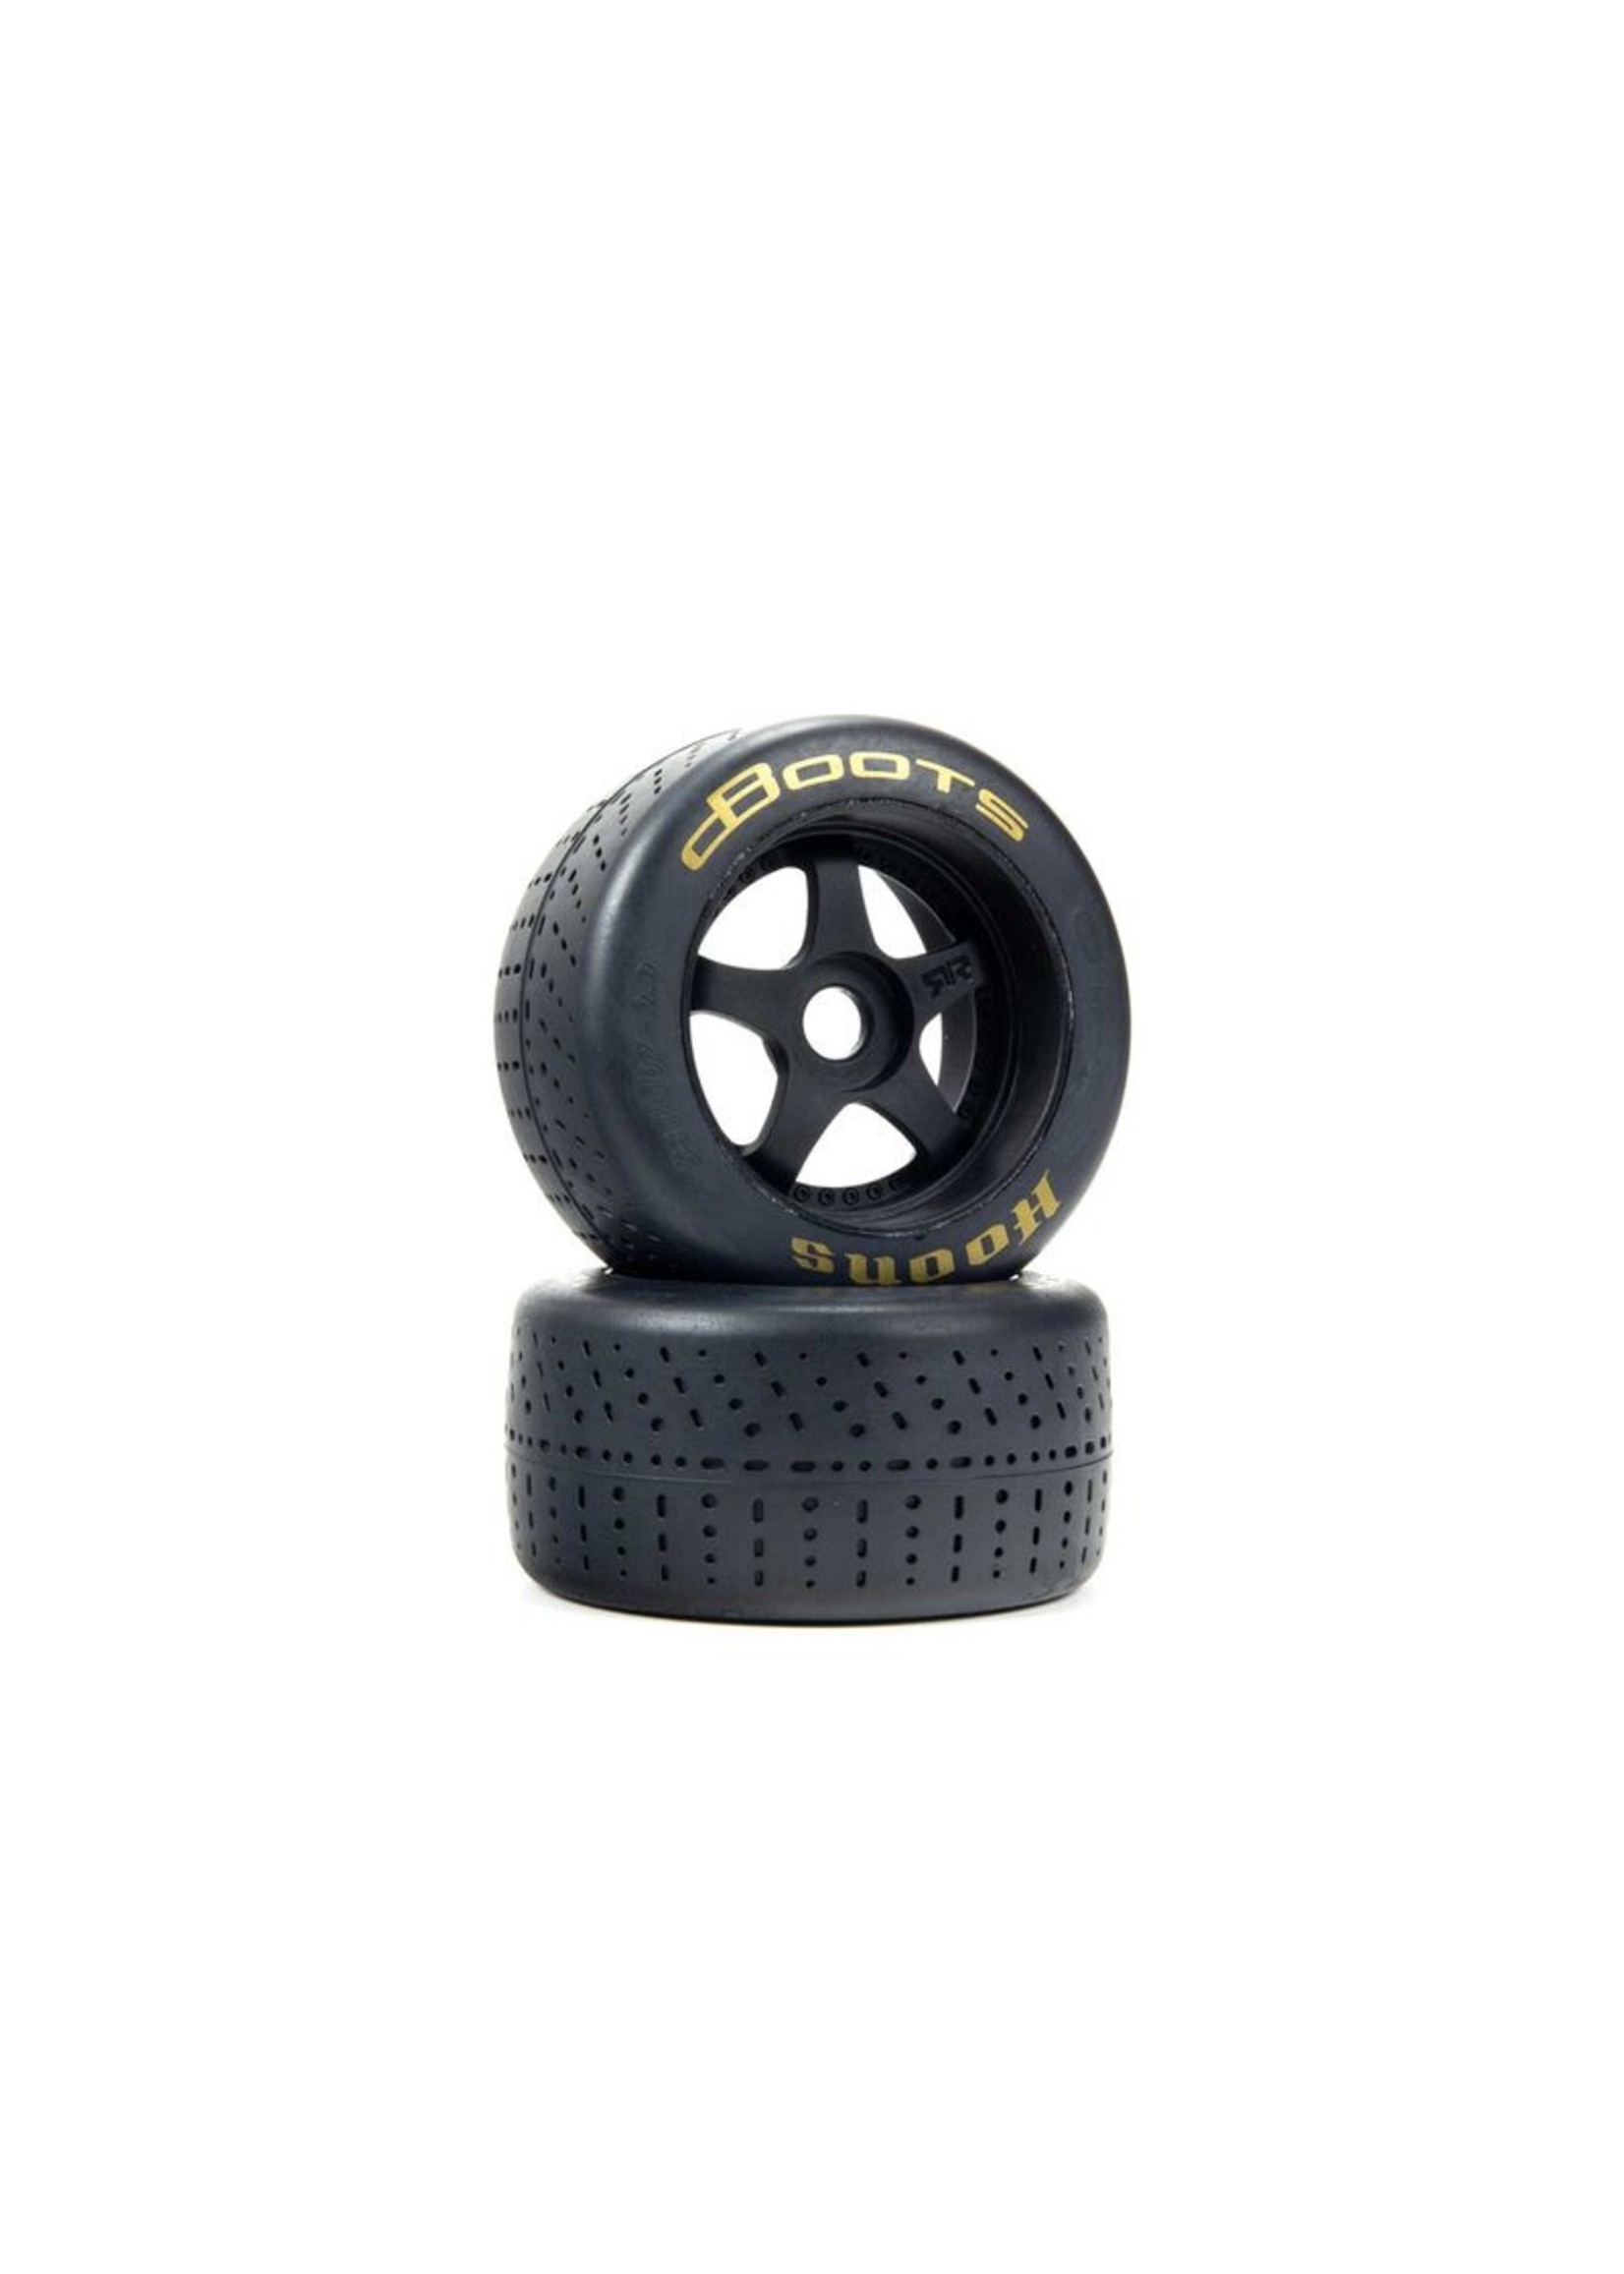 Arrma ARA550085 - 1/7 dBoots Hoons Rear 107 Gold Pre-Mounted Belted Tires